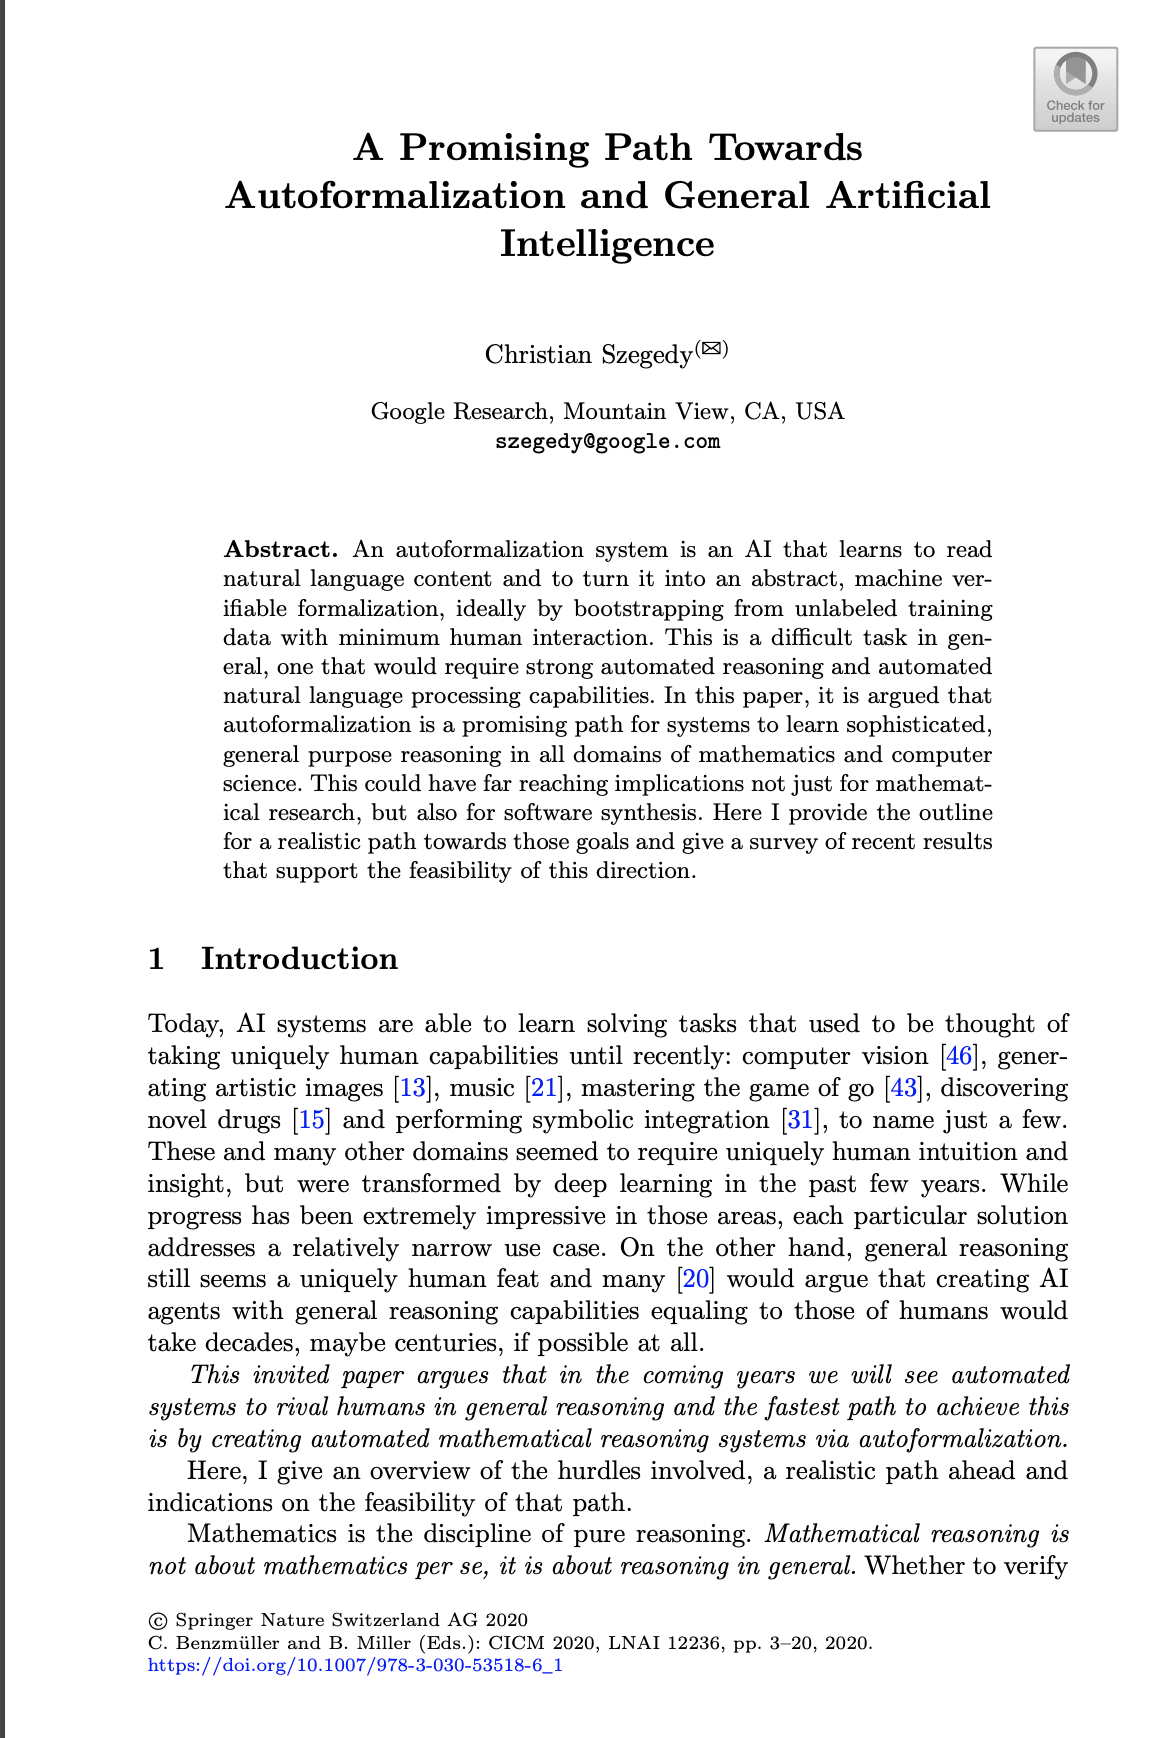 Picture of the first page of the research paper